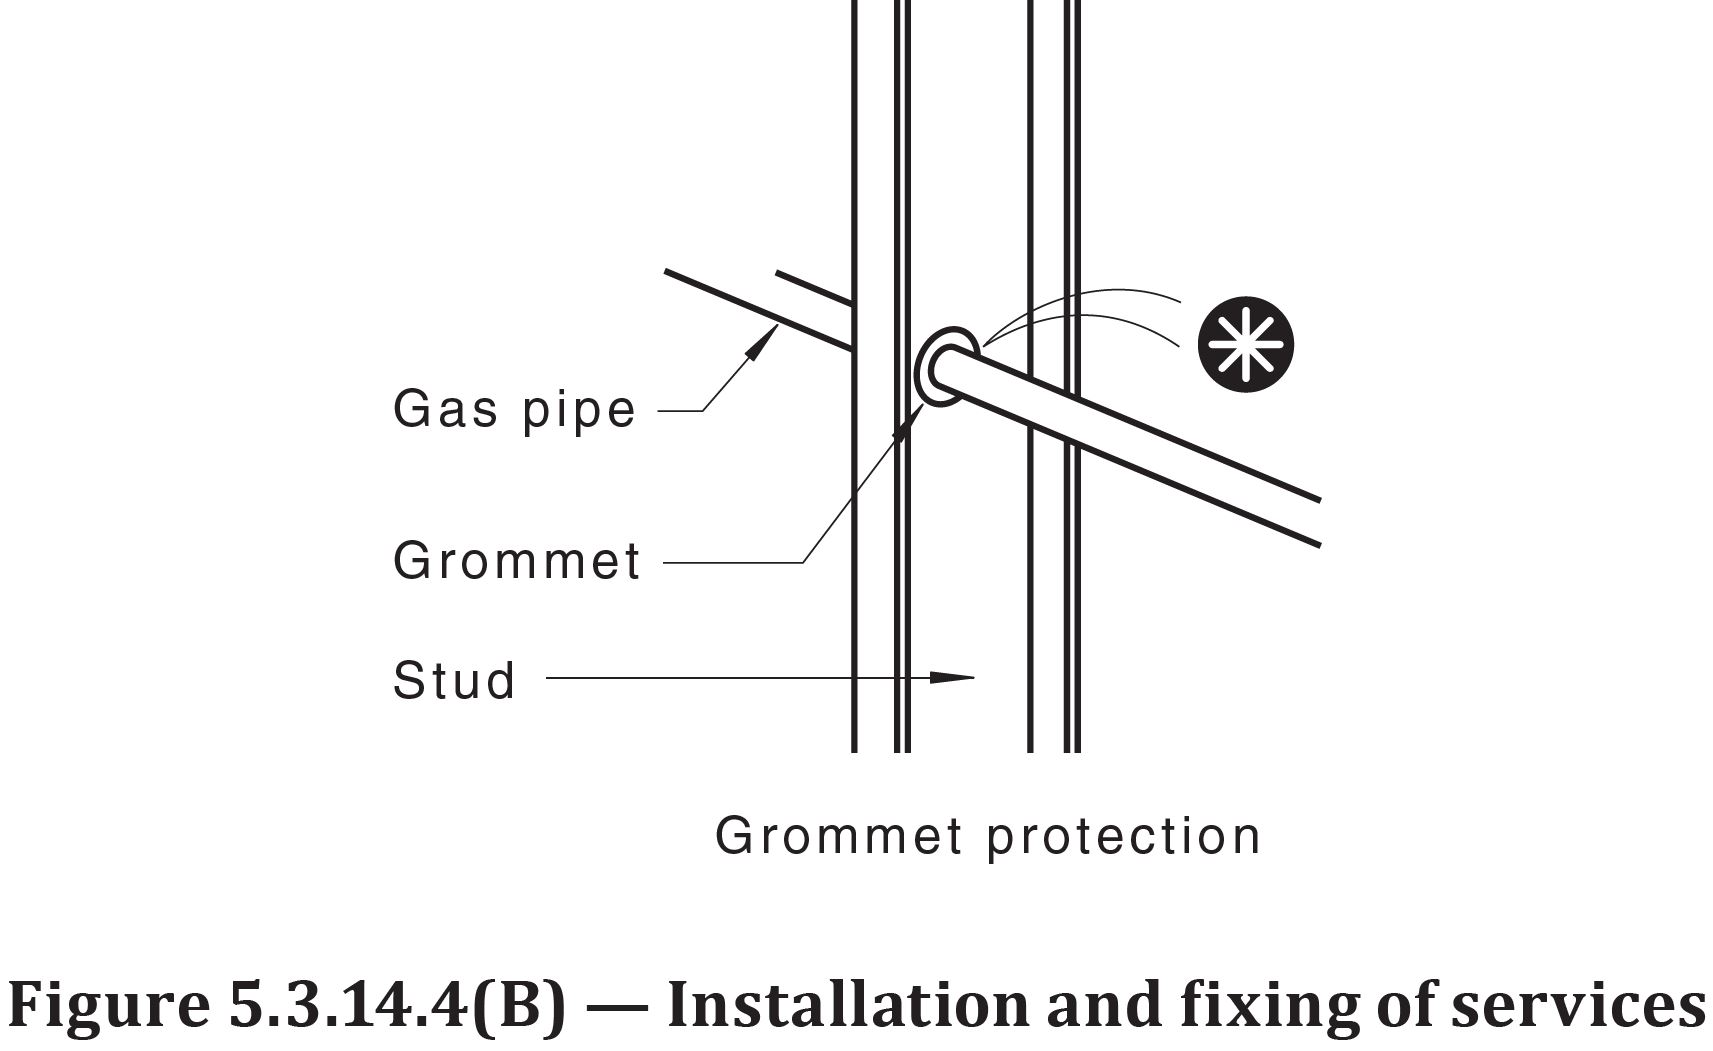 Diagram example of installation and fixing of services using grommet protection